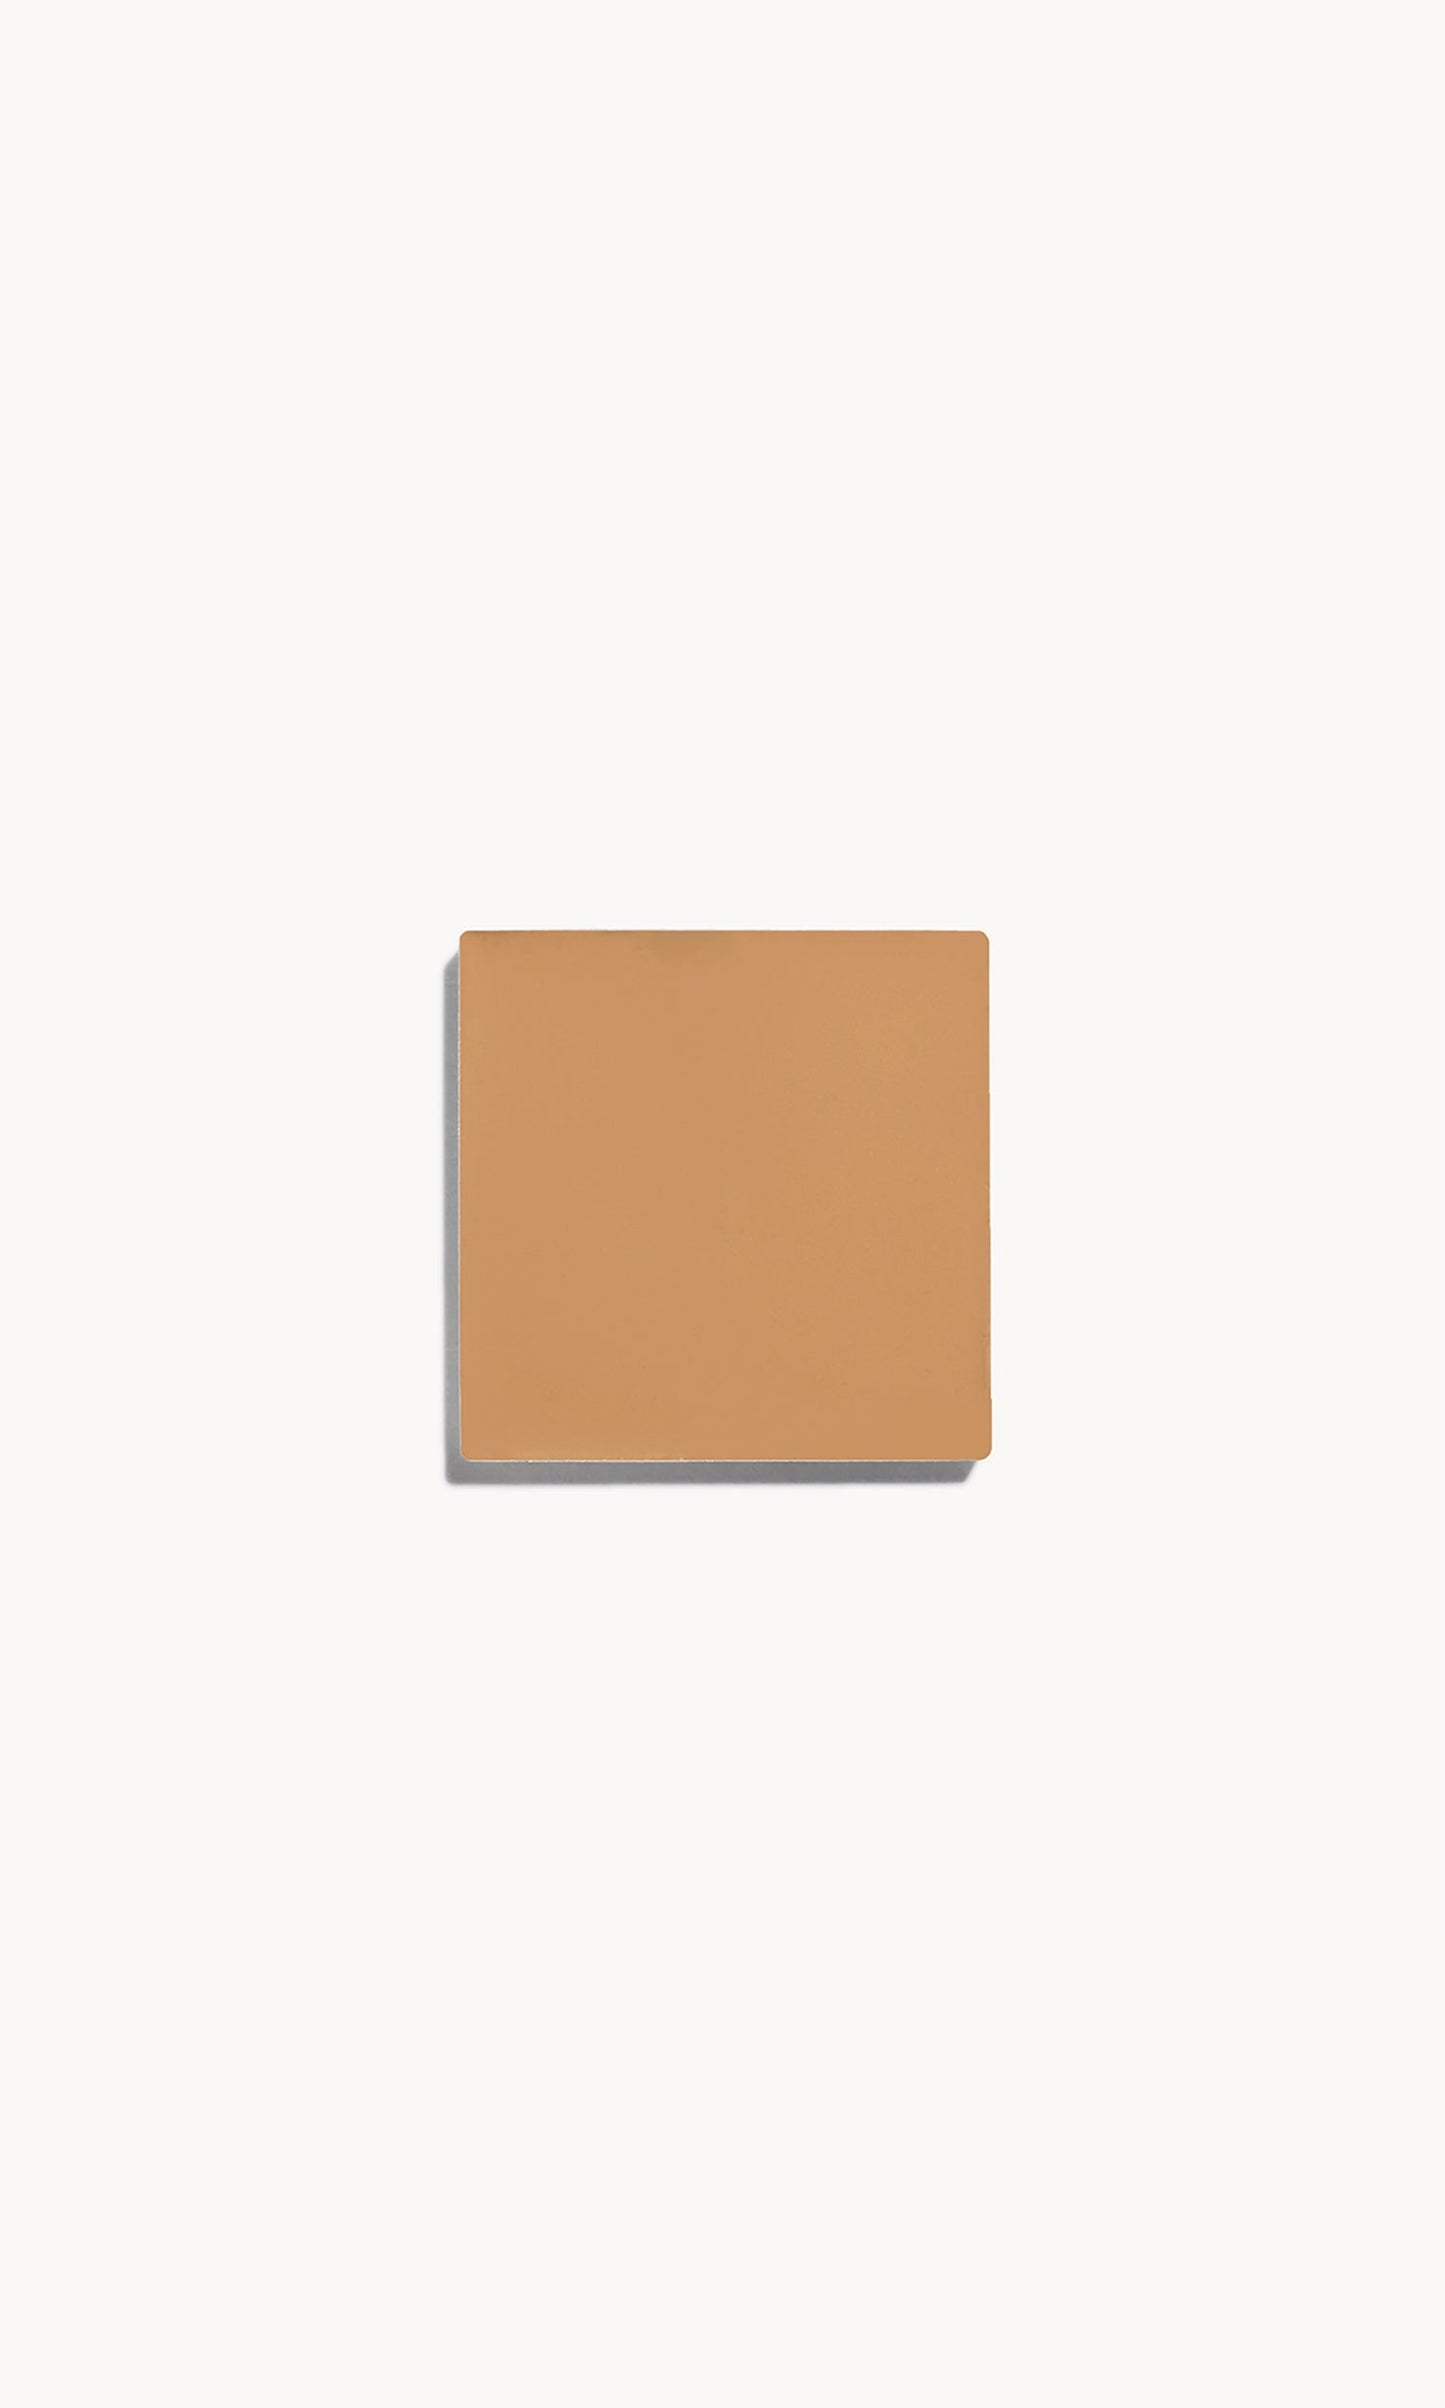 Square of medium cool-toned cream foundation on a white background